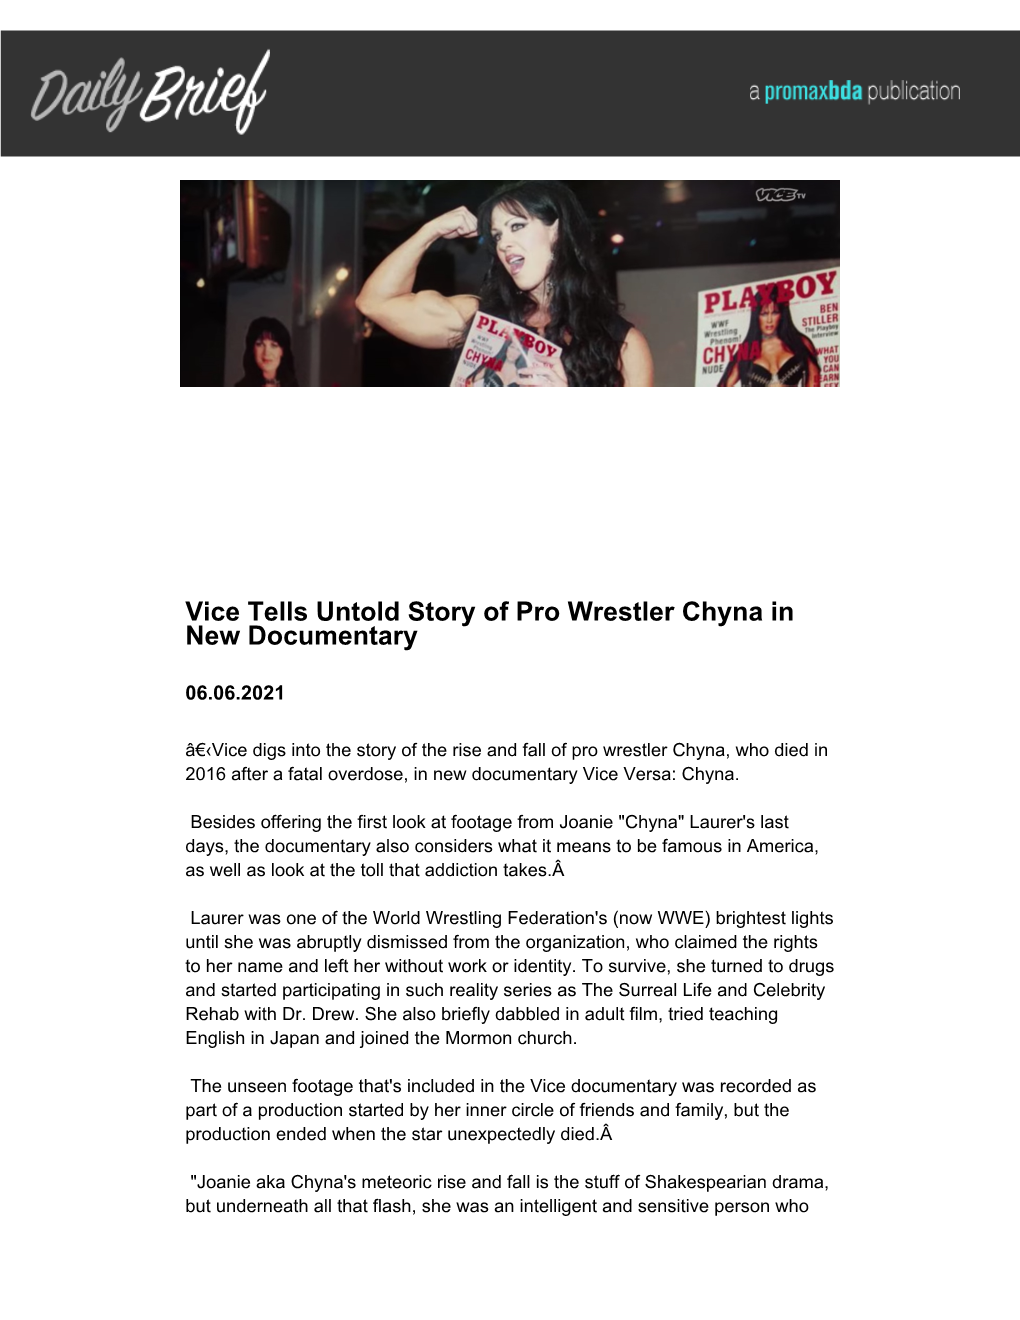 Vice Tells Untold Story of Pro Wrestler Chyna in New Documentary